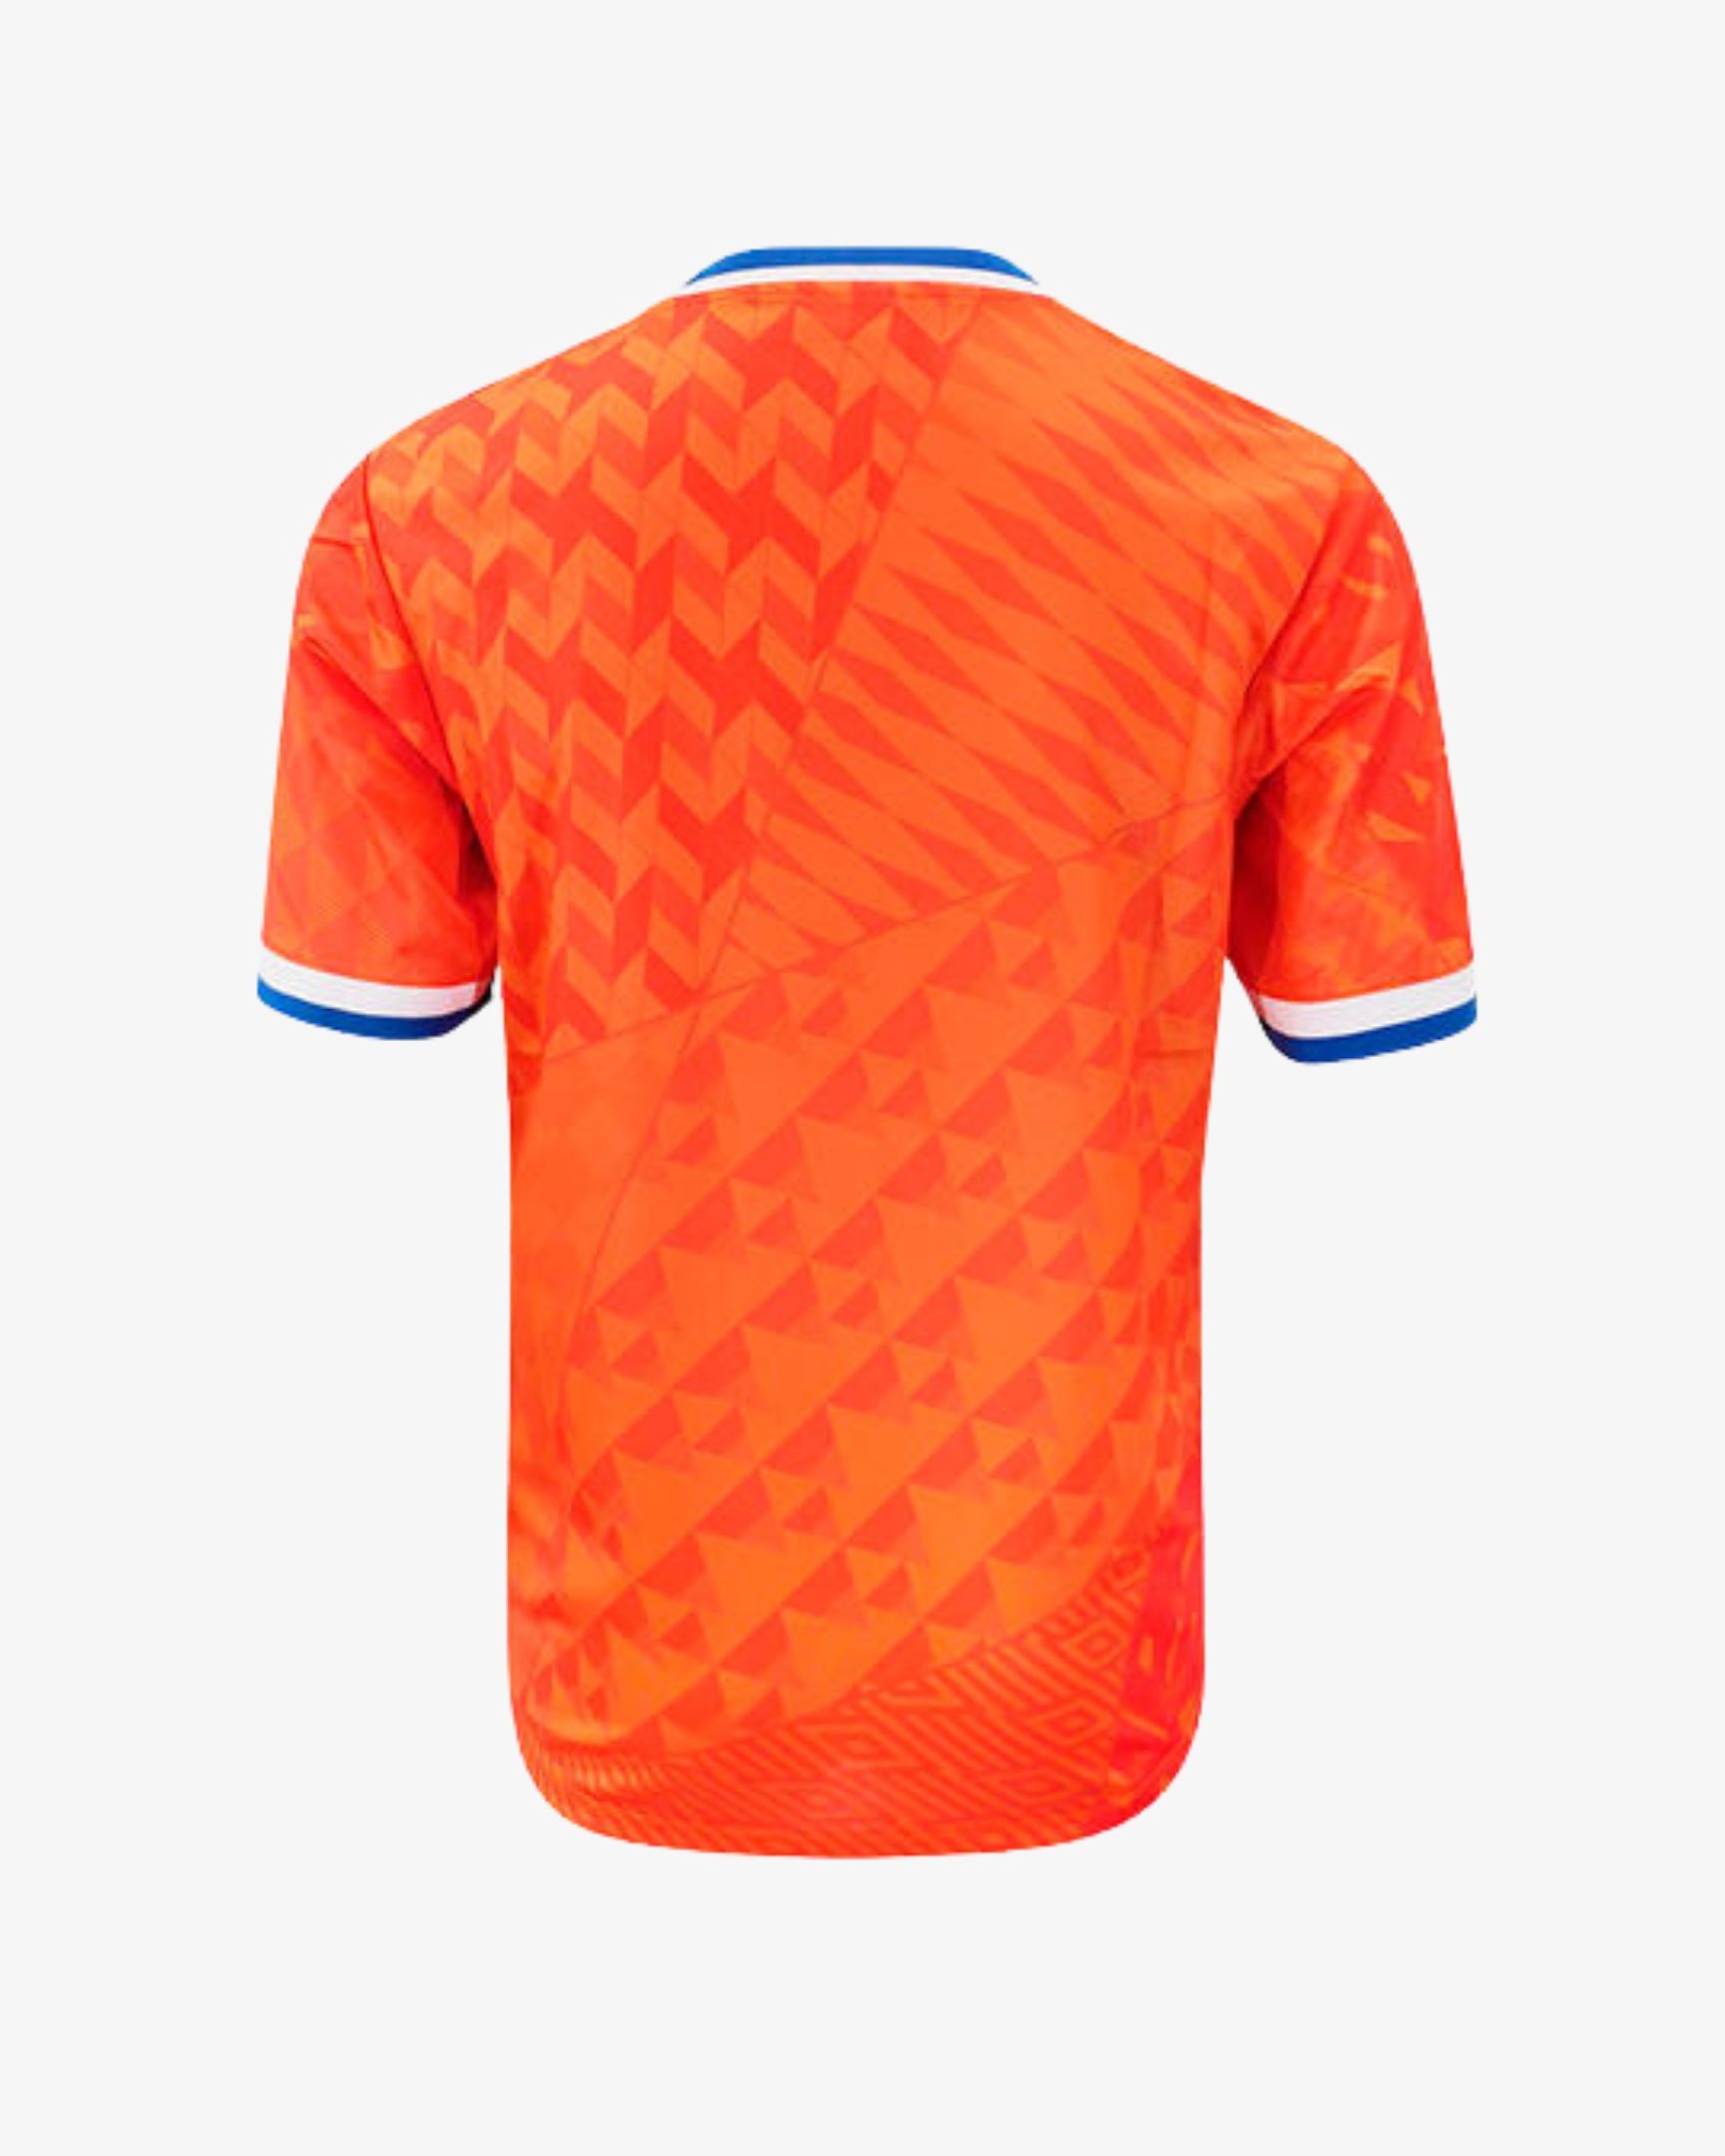 HOLLAND ICONIC GRAPHIC JERSEY